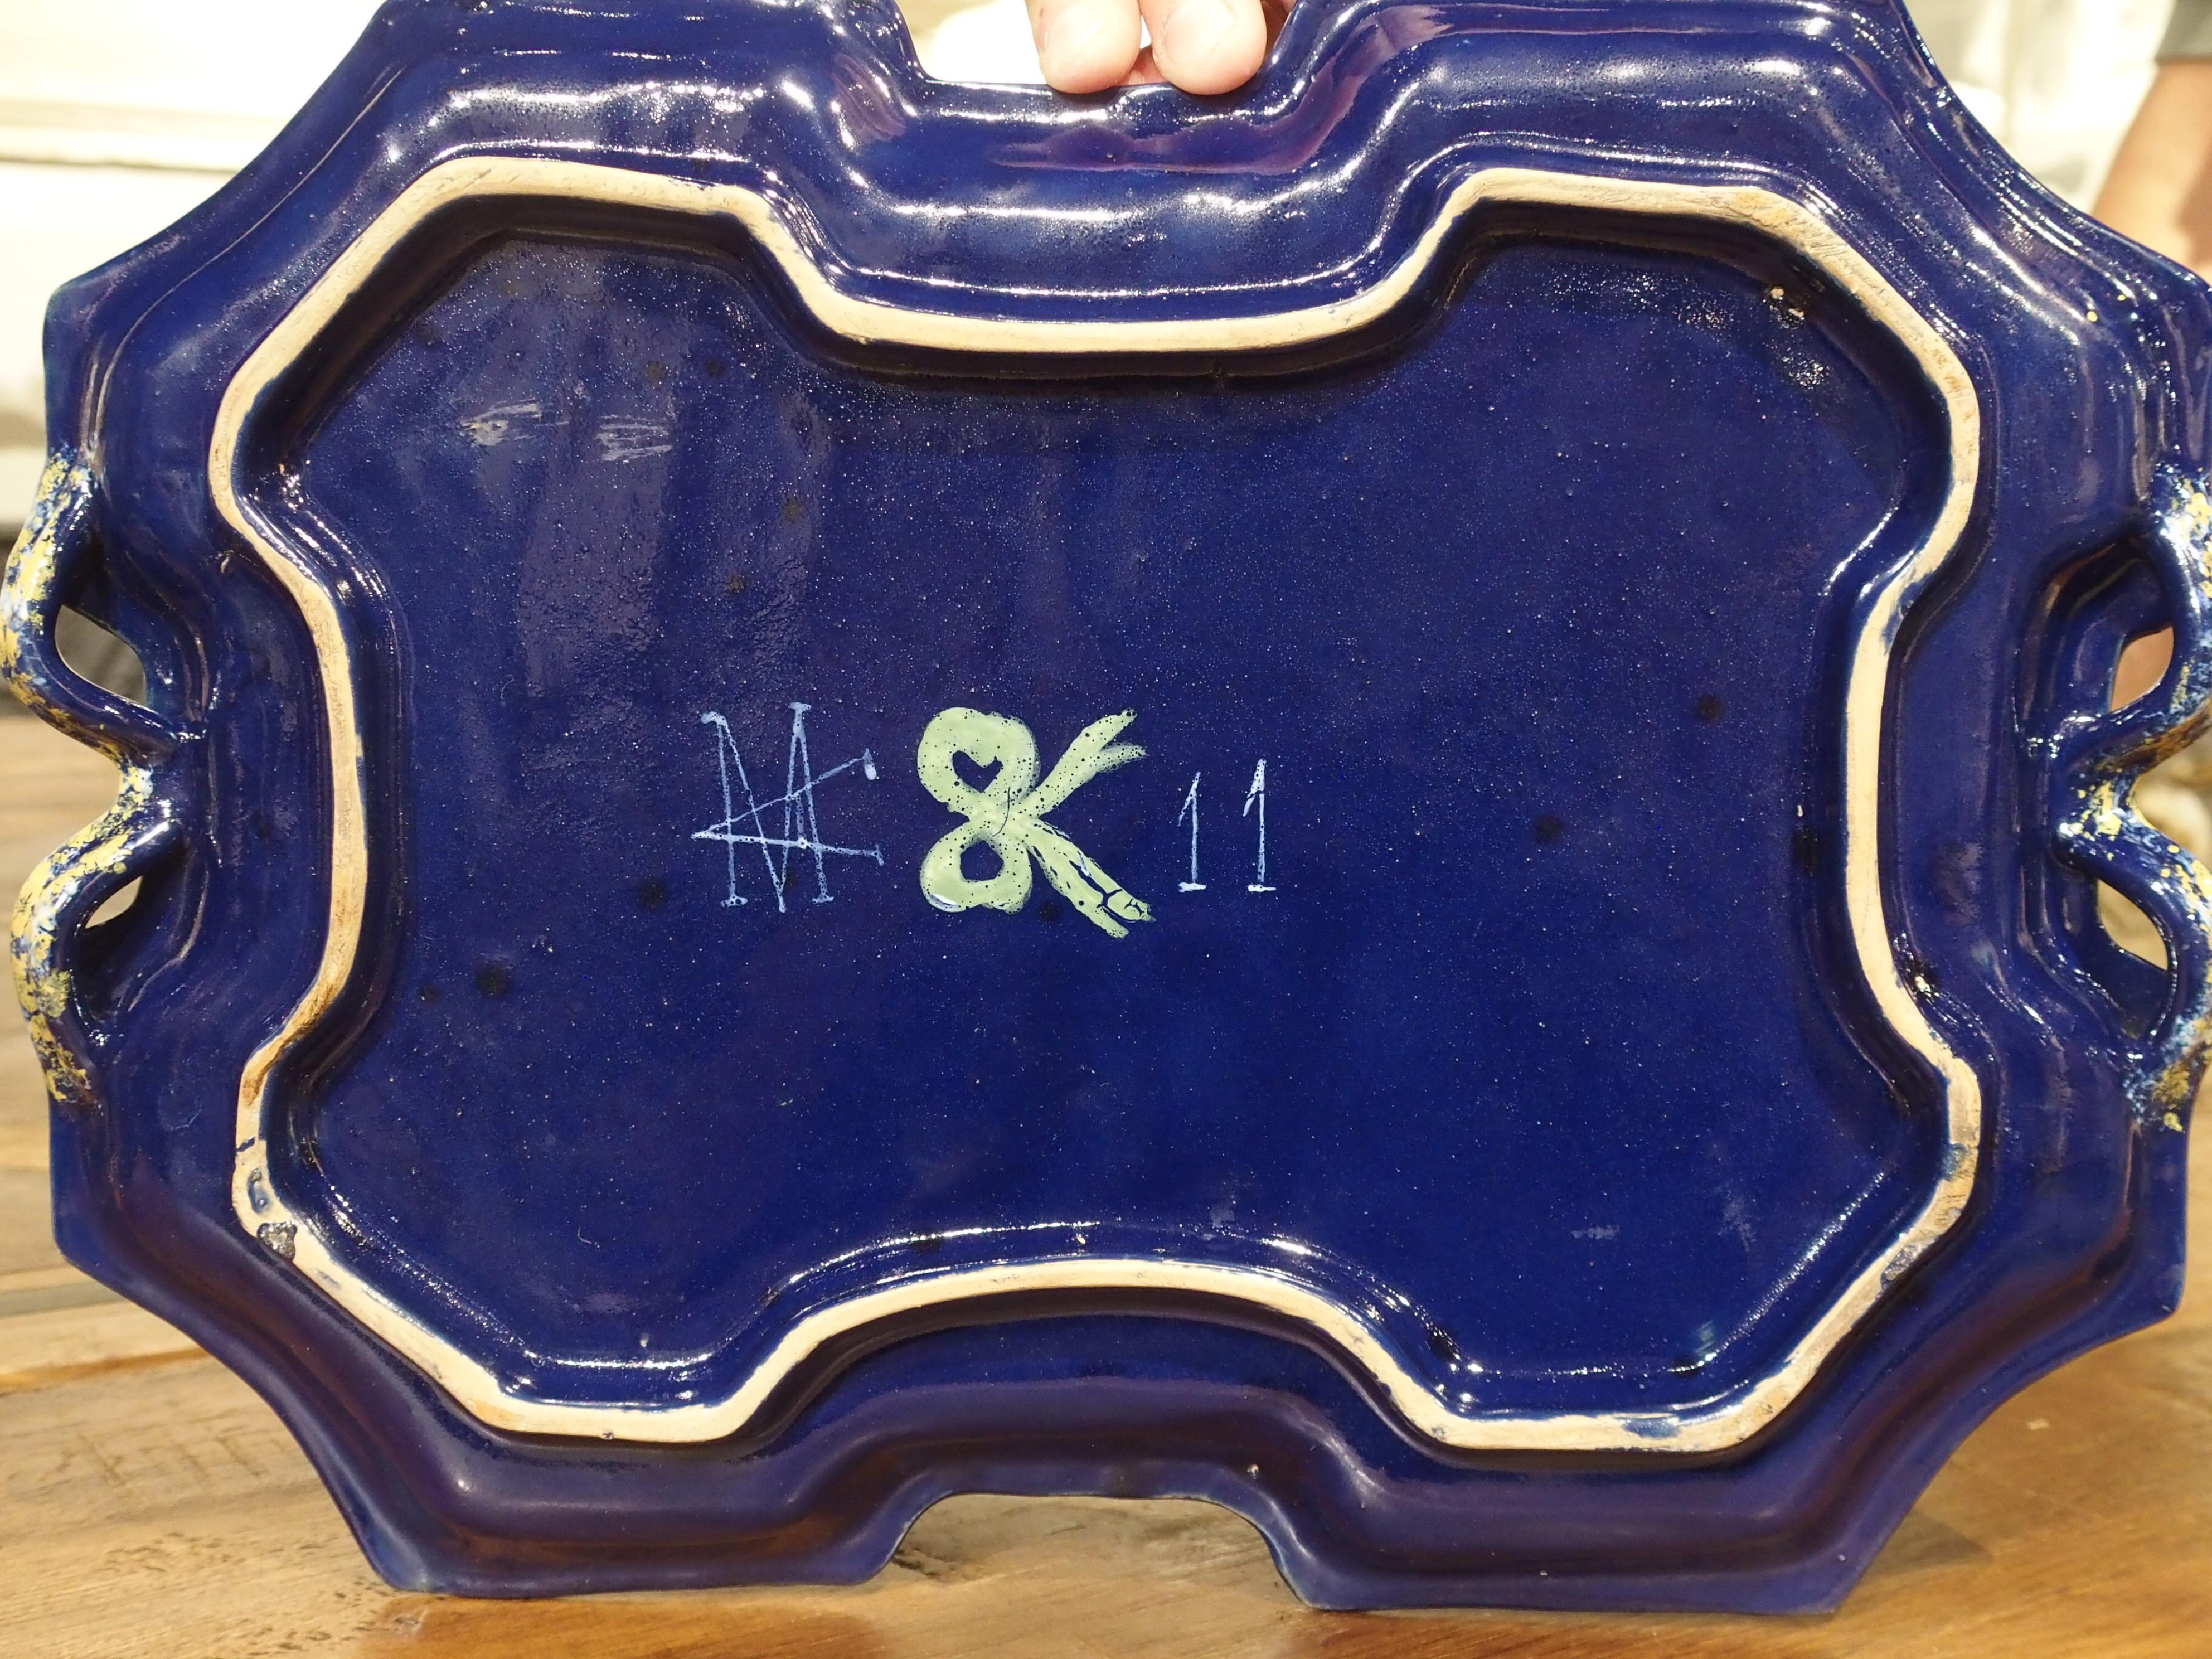 19th Century French “Bleu de Nevers” Faience Smoking Service Tray, by Montagnon For Sale